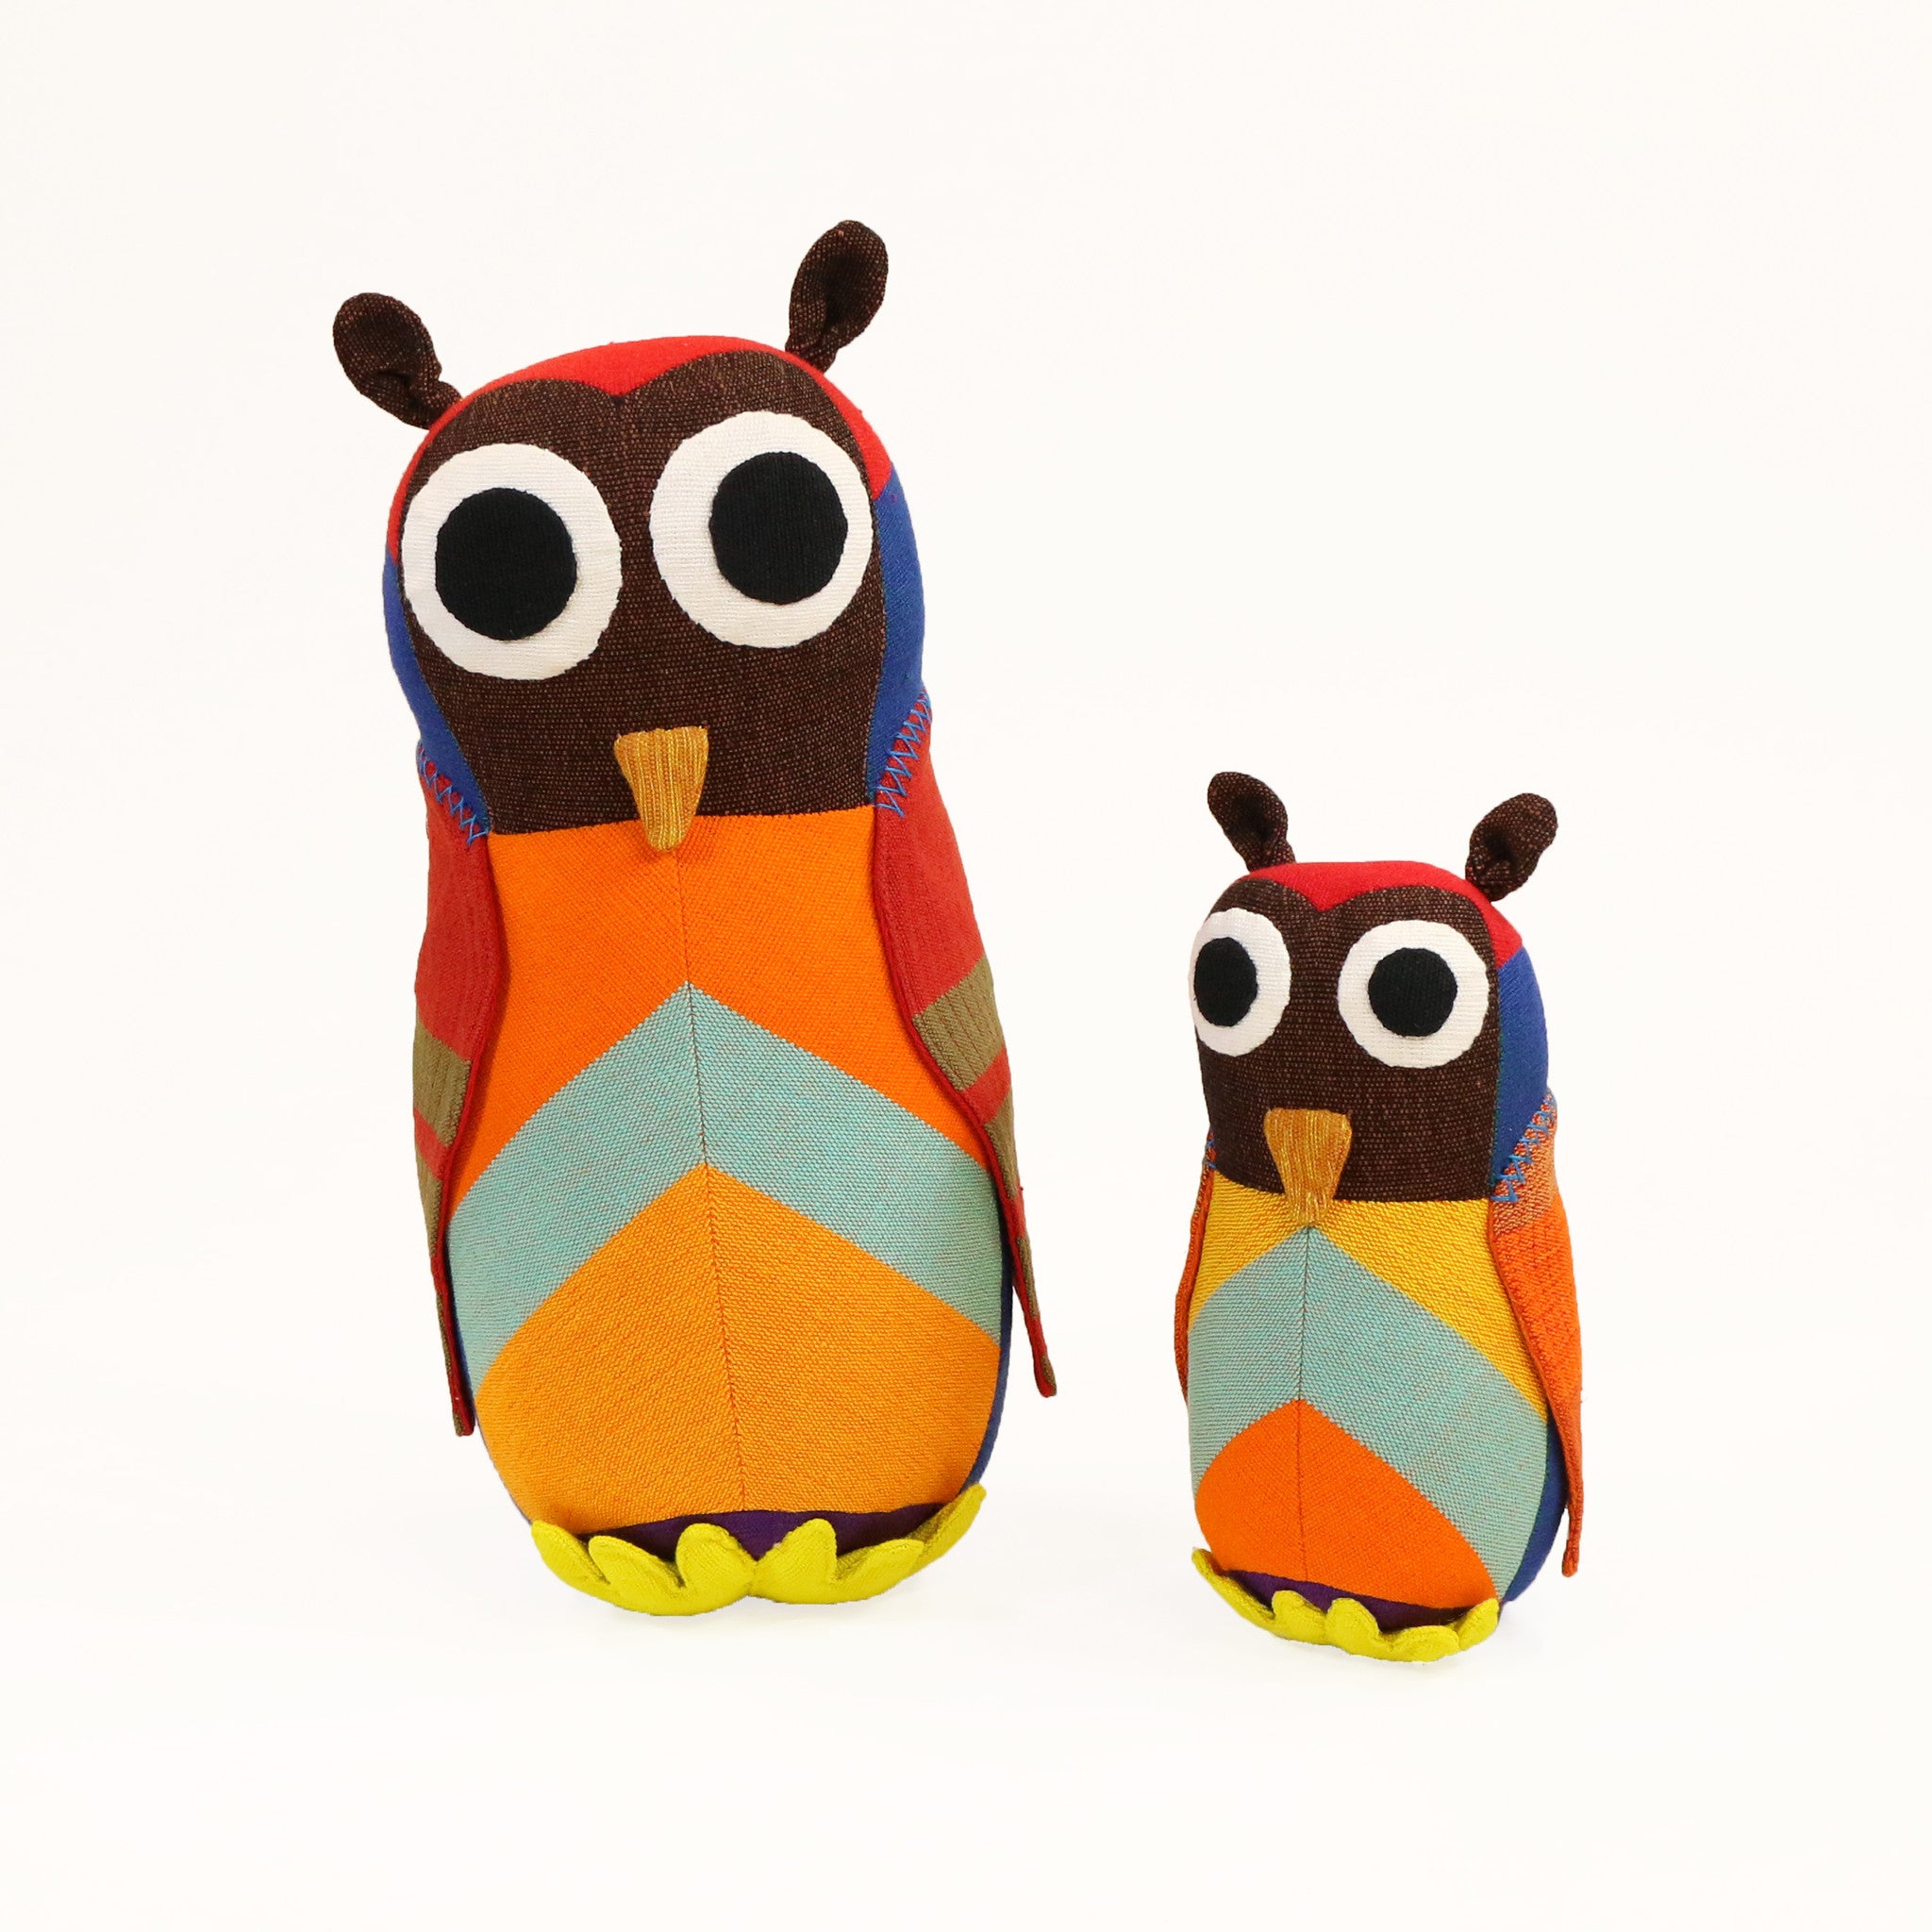 Owl Toy - Henley, the Owl (small & large sizes)